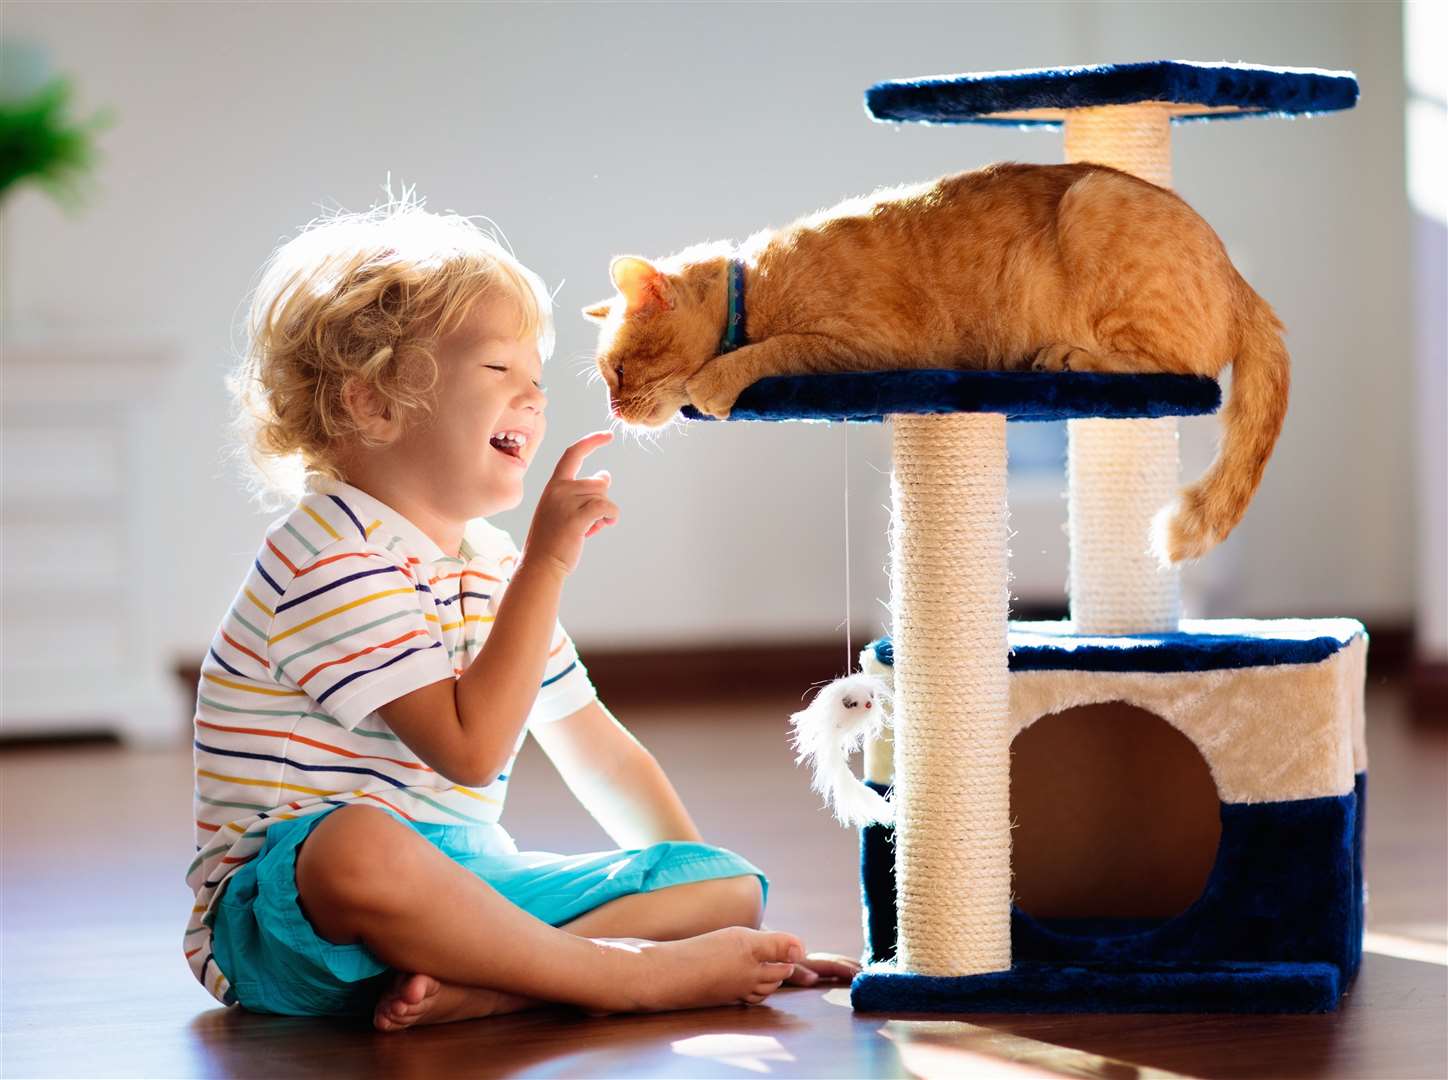 Children and cats have been banned from the development. Photo: Stock